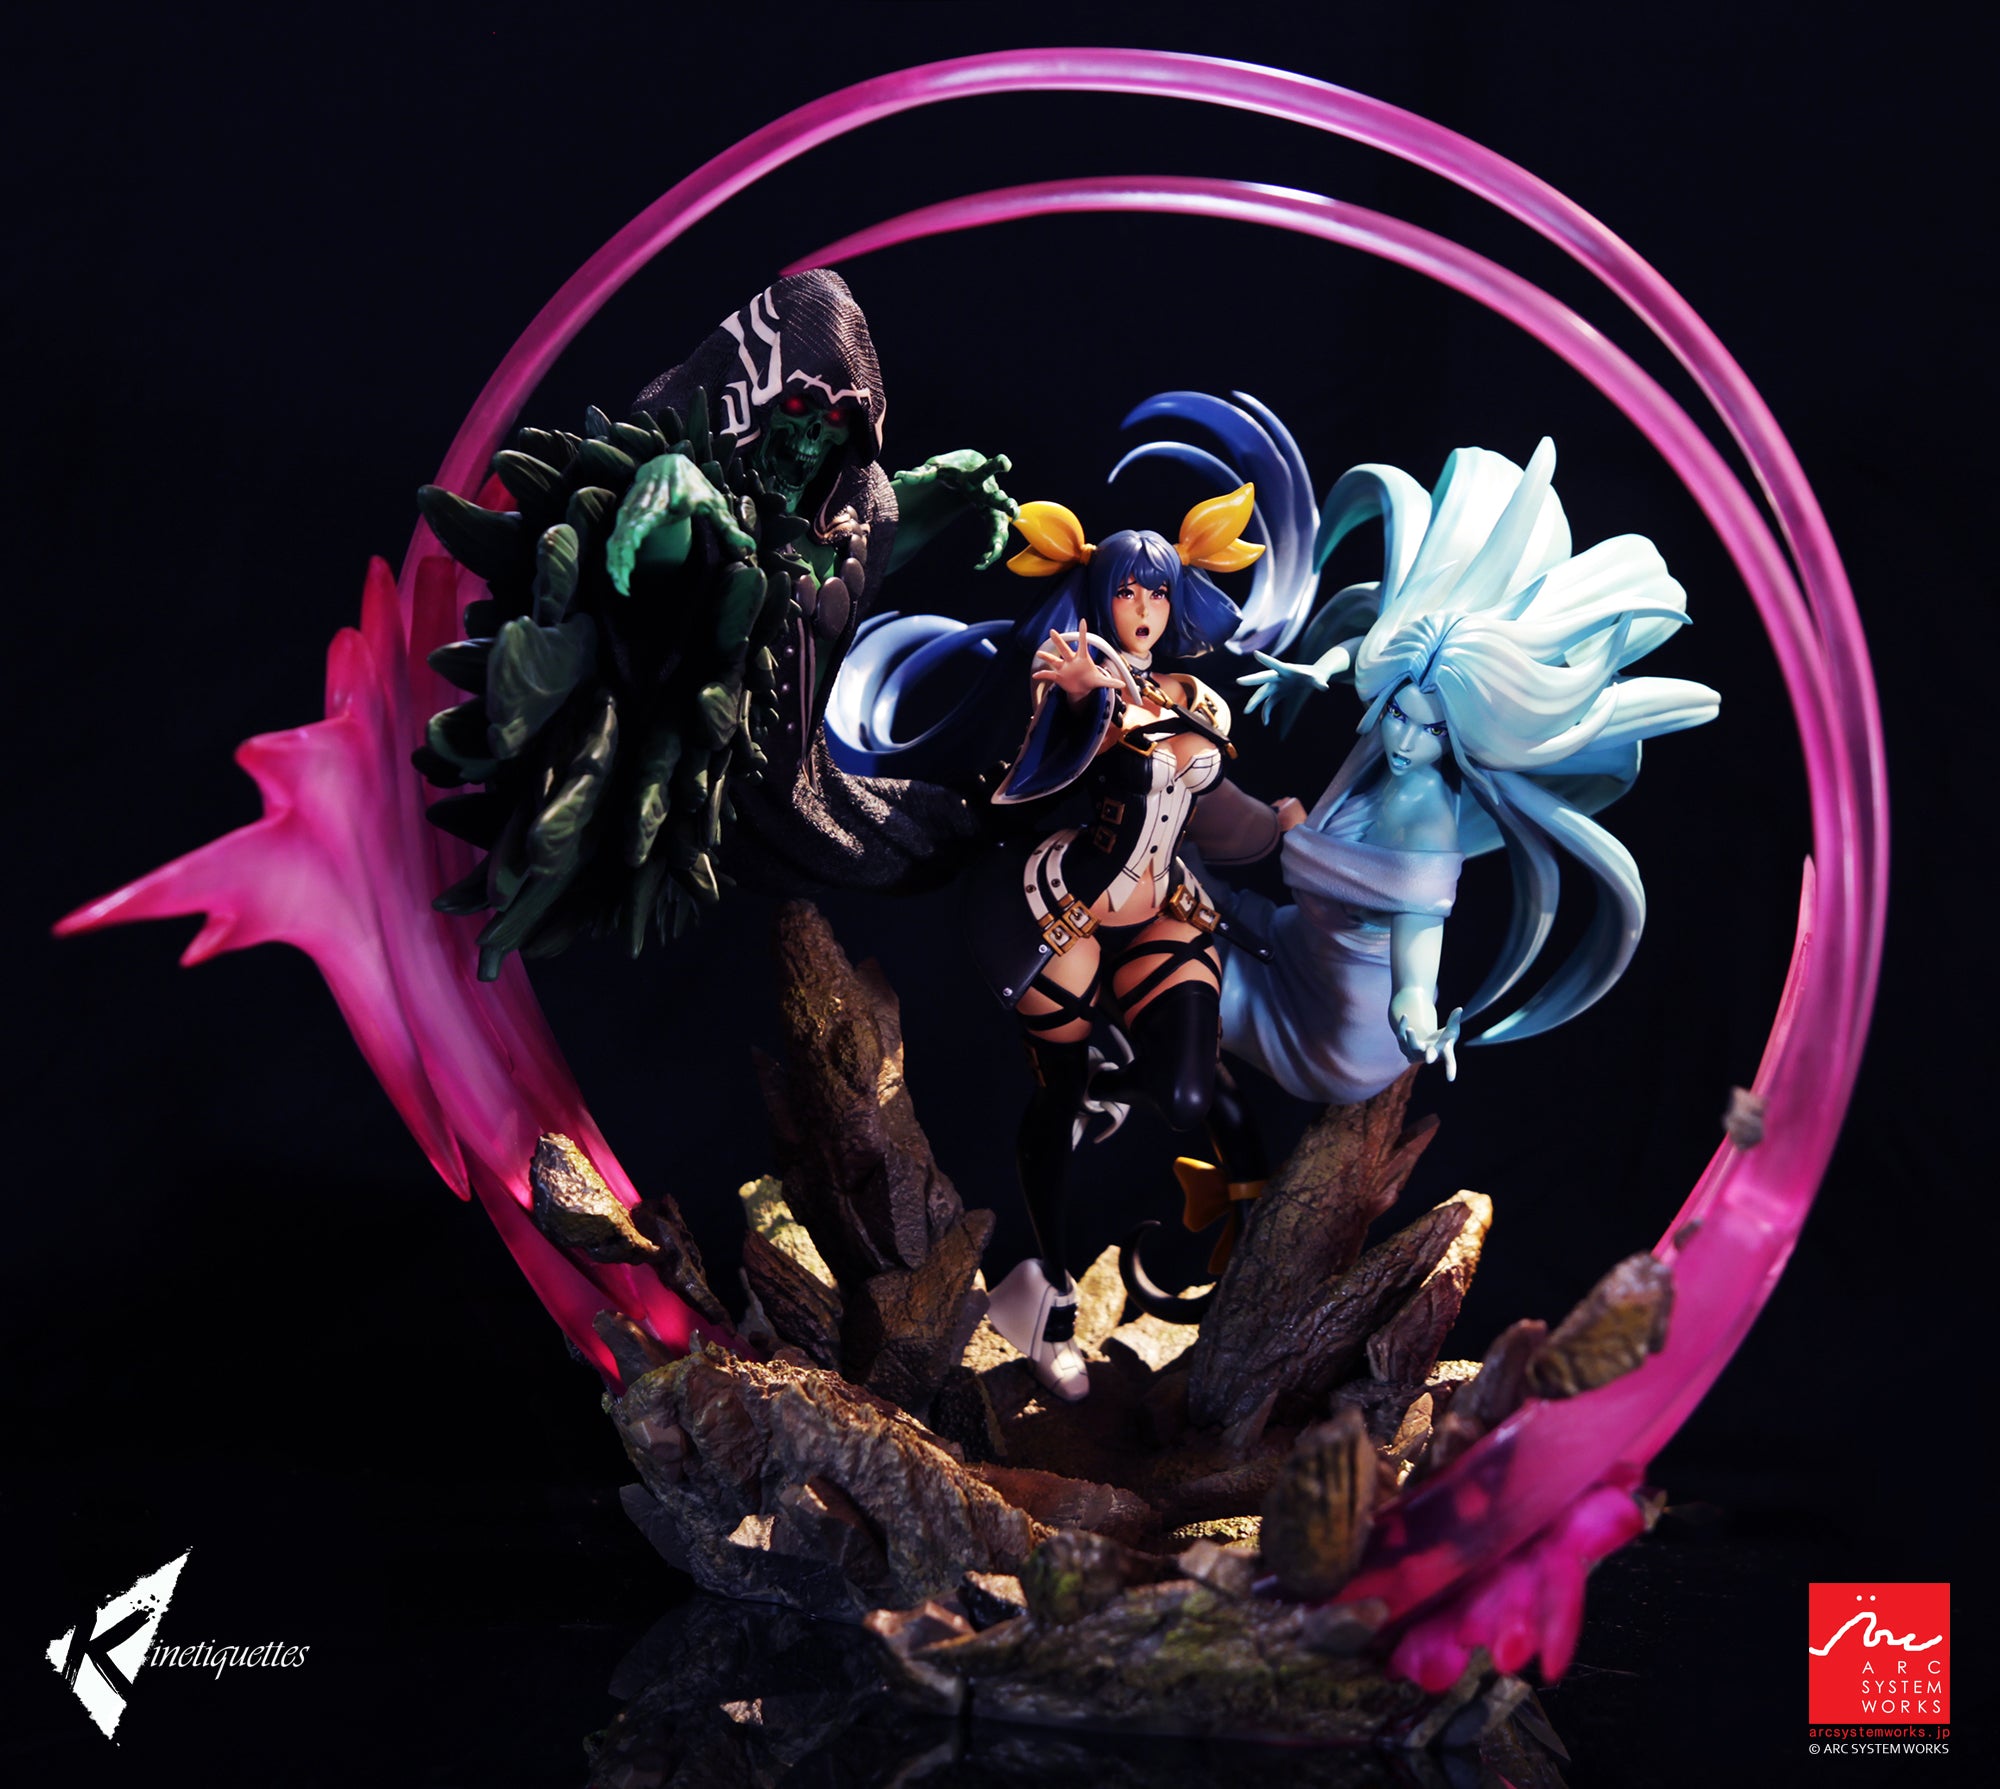 Kinetiquettes - Guilty Gear - Dizzy Diorama - Marvelous Toys